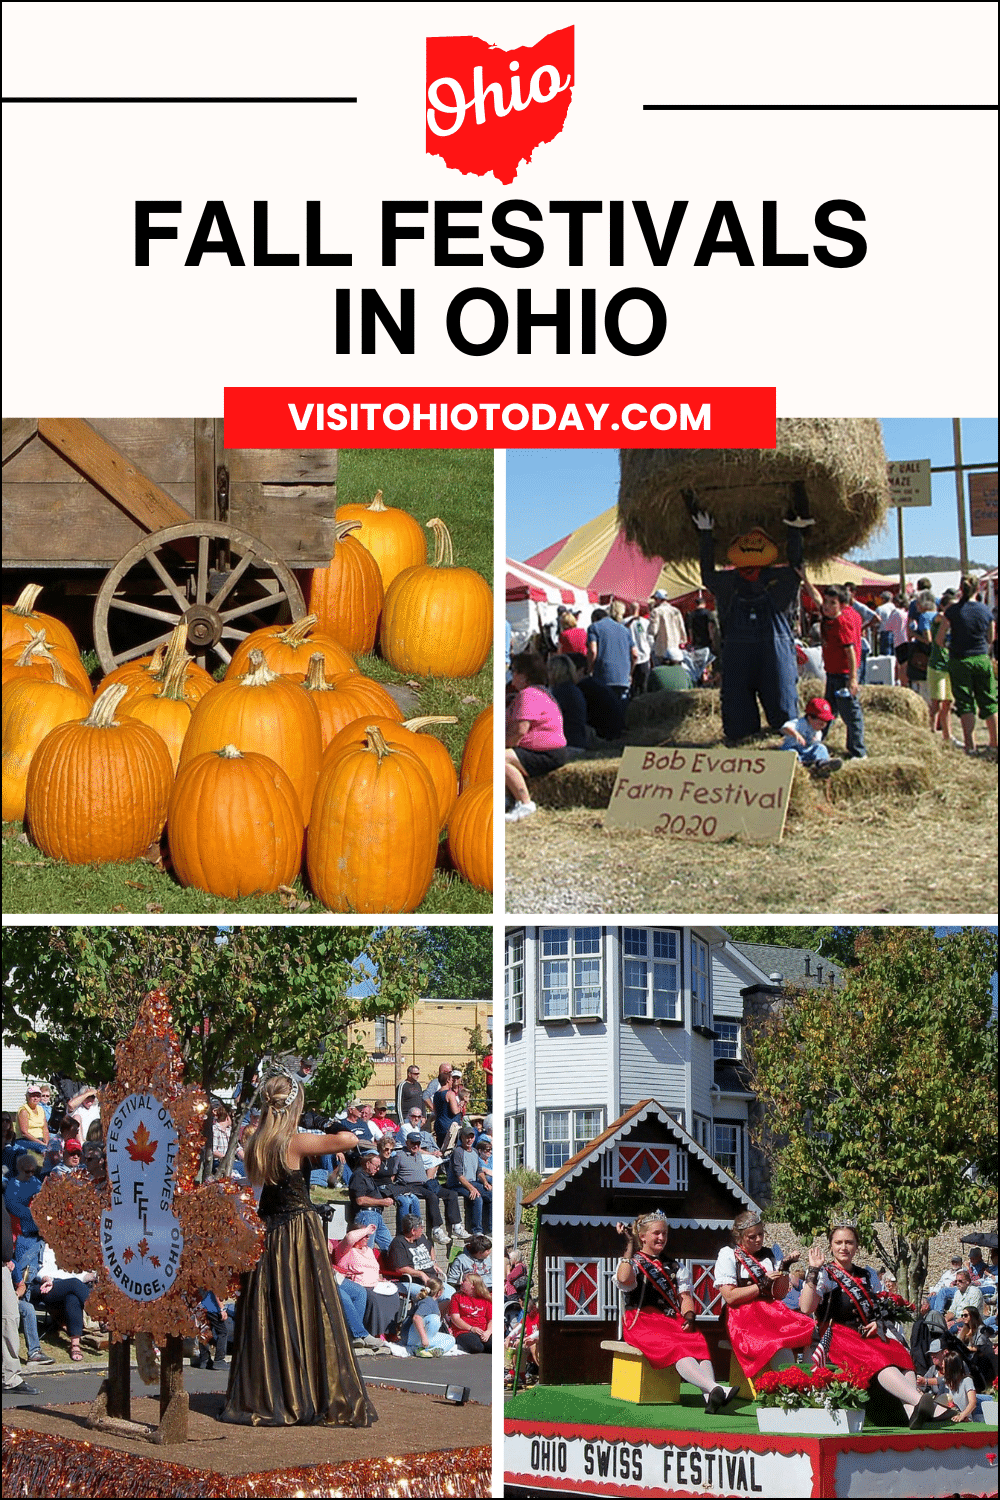 Ohio is the perfect place to check out and enjoy some wonderful fall festivals. Fall is the season for festivals, with Halloween, pumpkins and corn mazes all happening in this season. Here we focus on 10 fun fall festivals in Ohio.